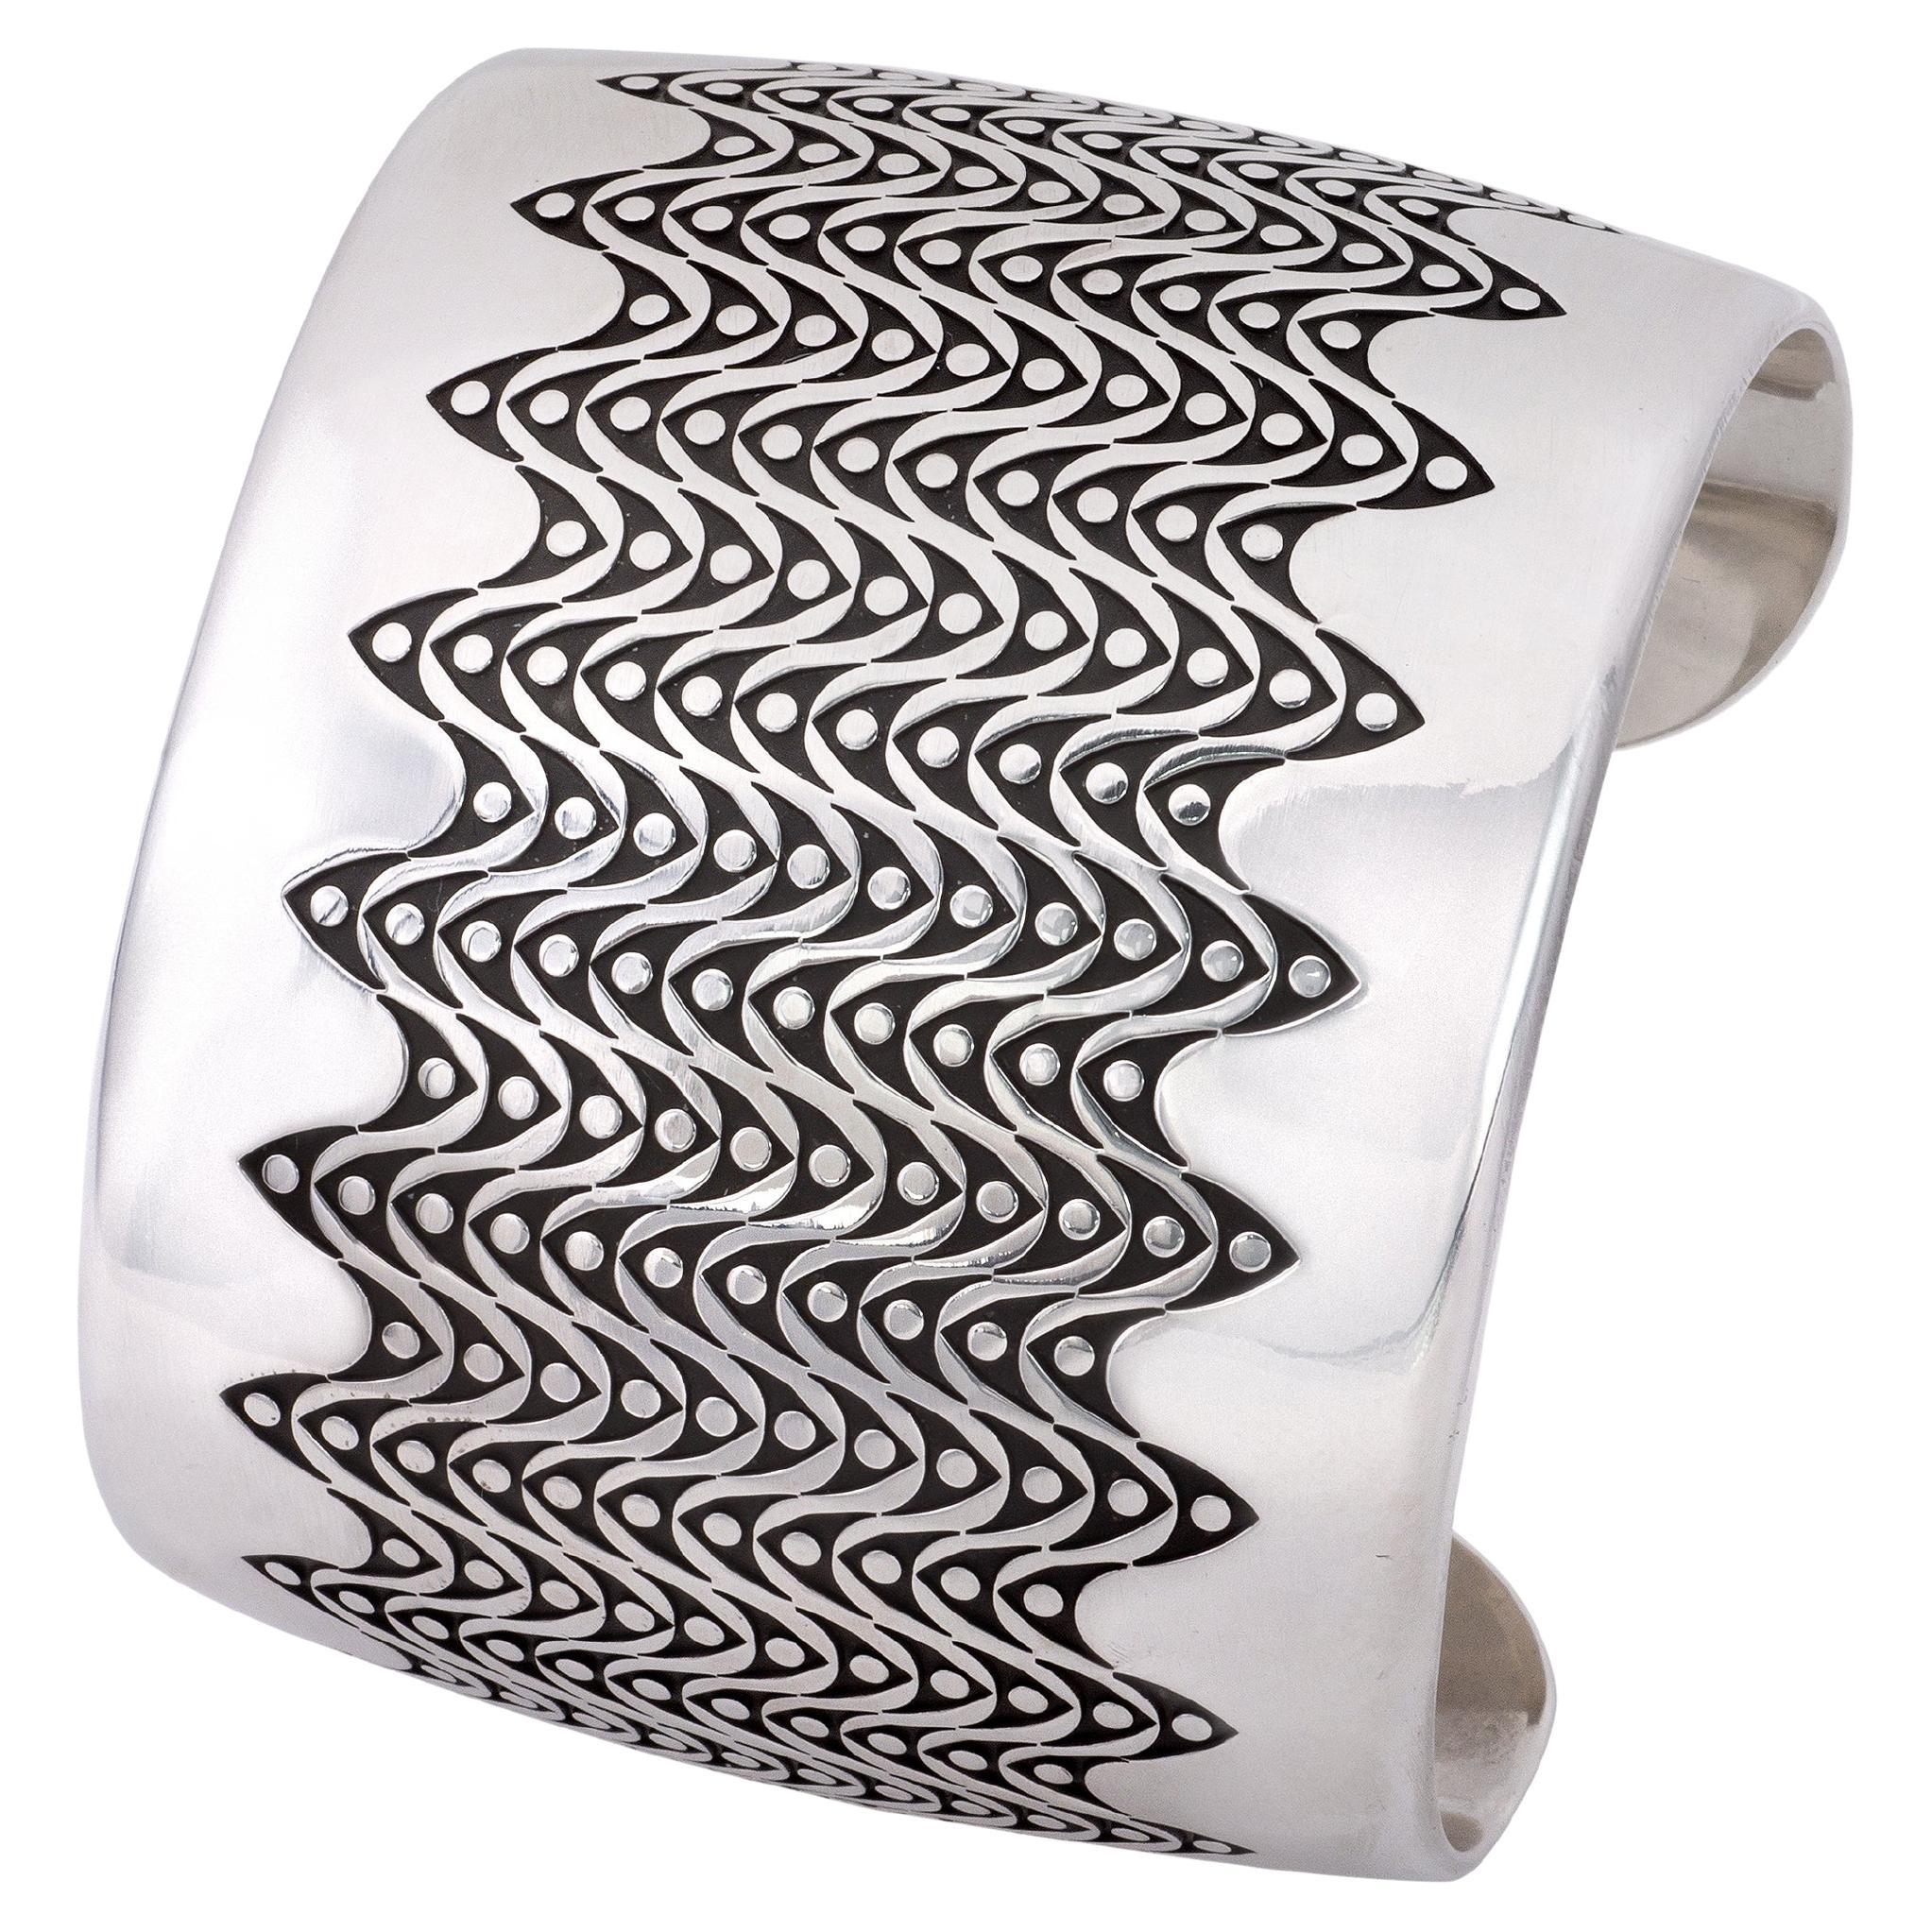 Norbert Peshlaki One of a Kind Wide Wave Patterned Cuff